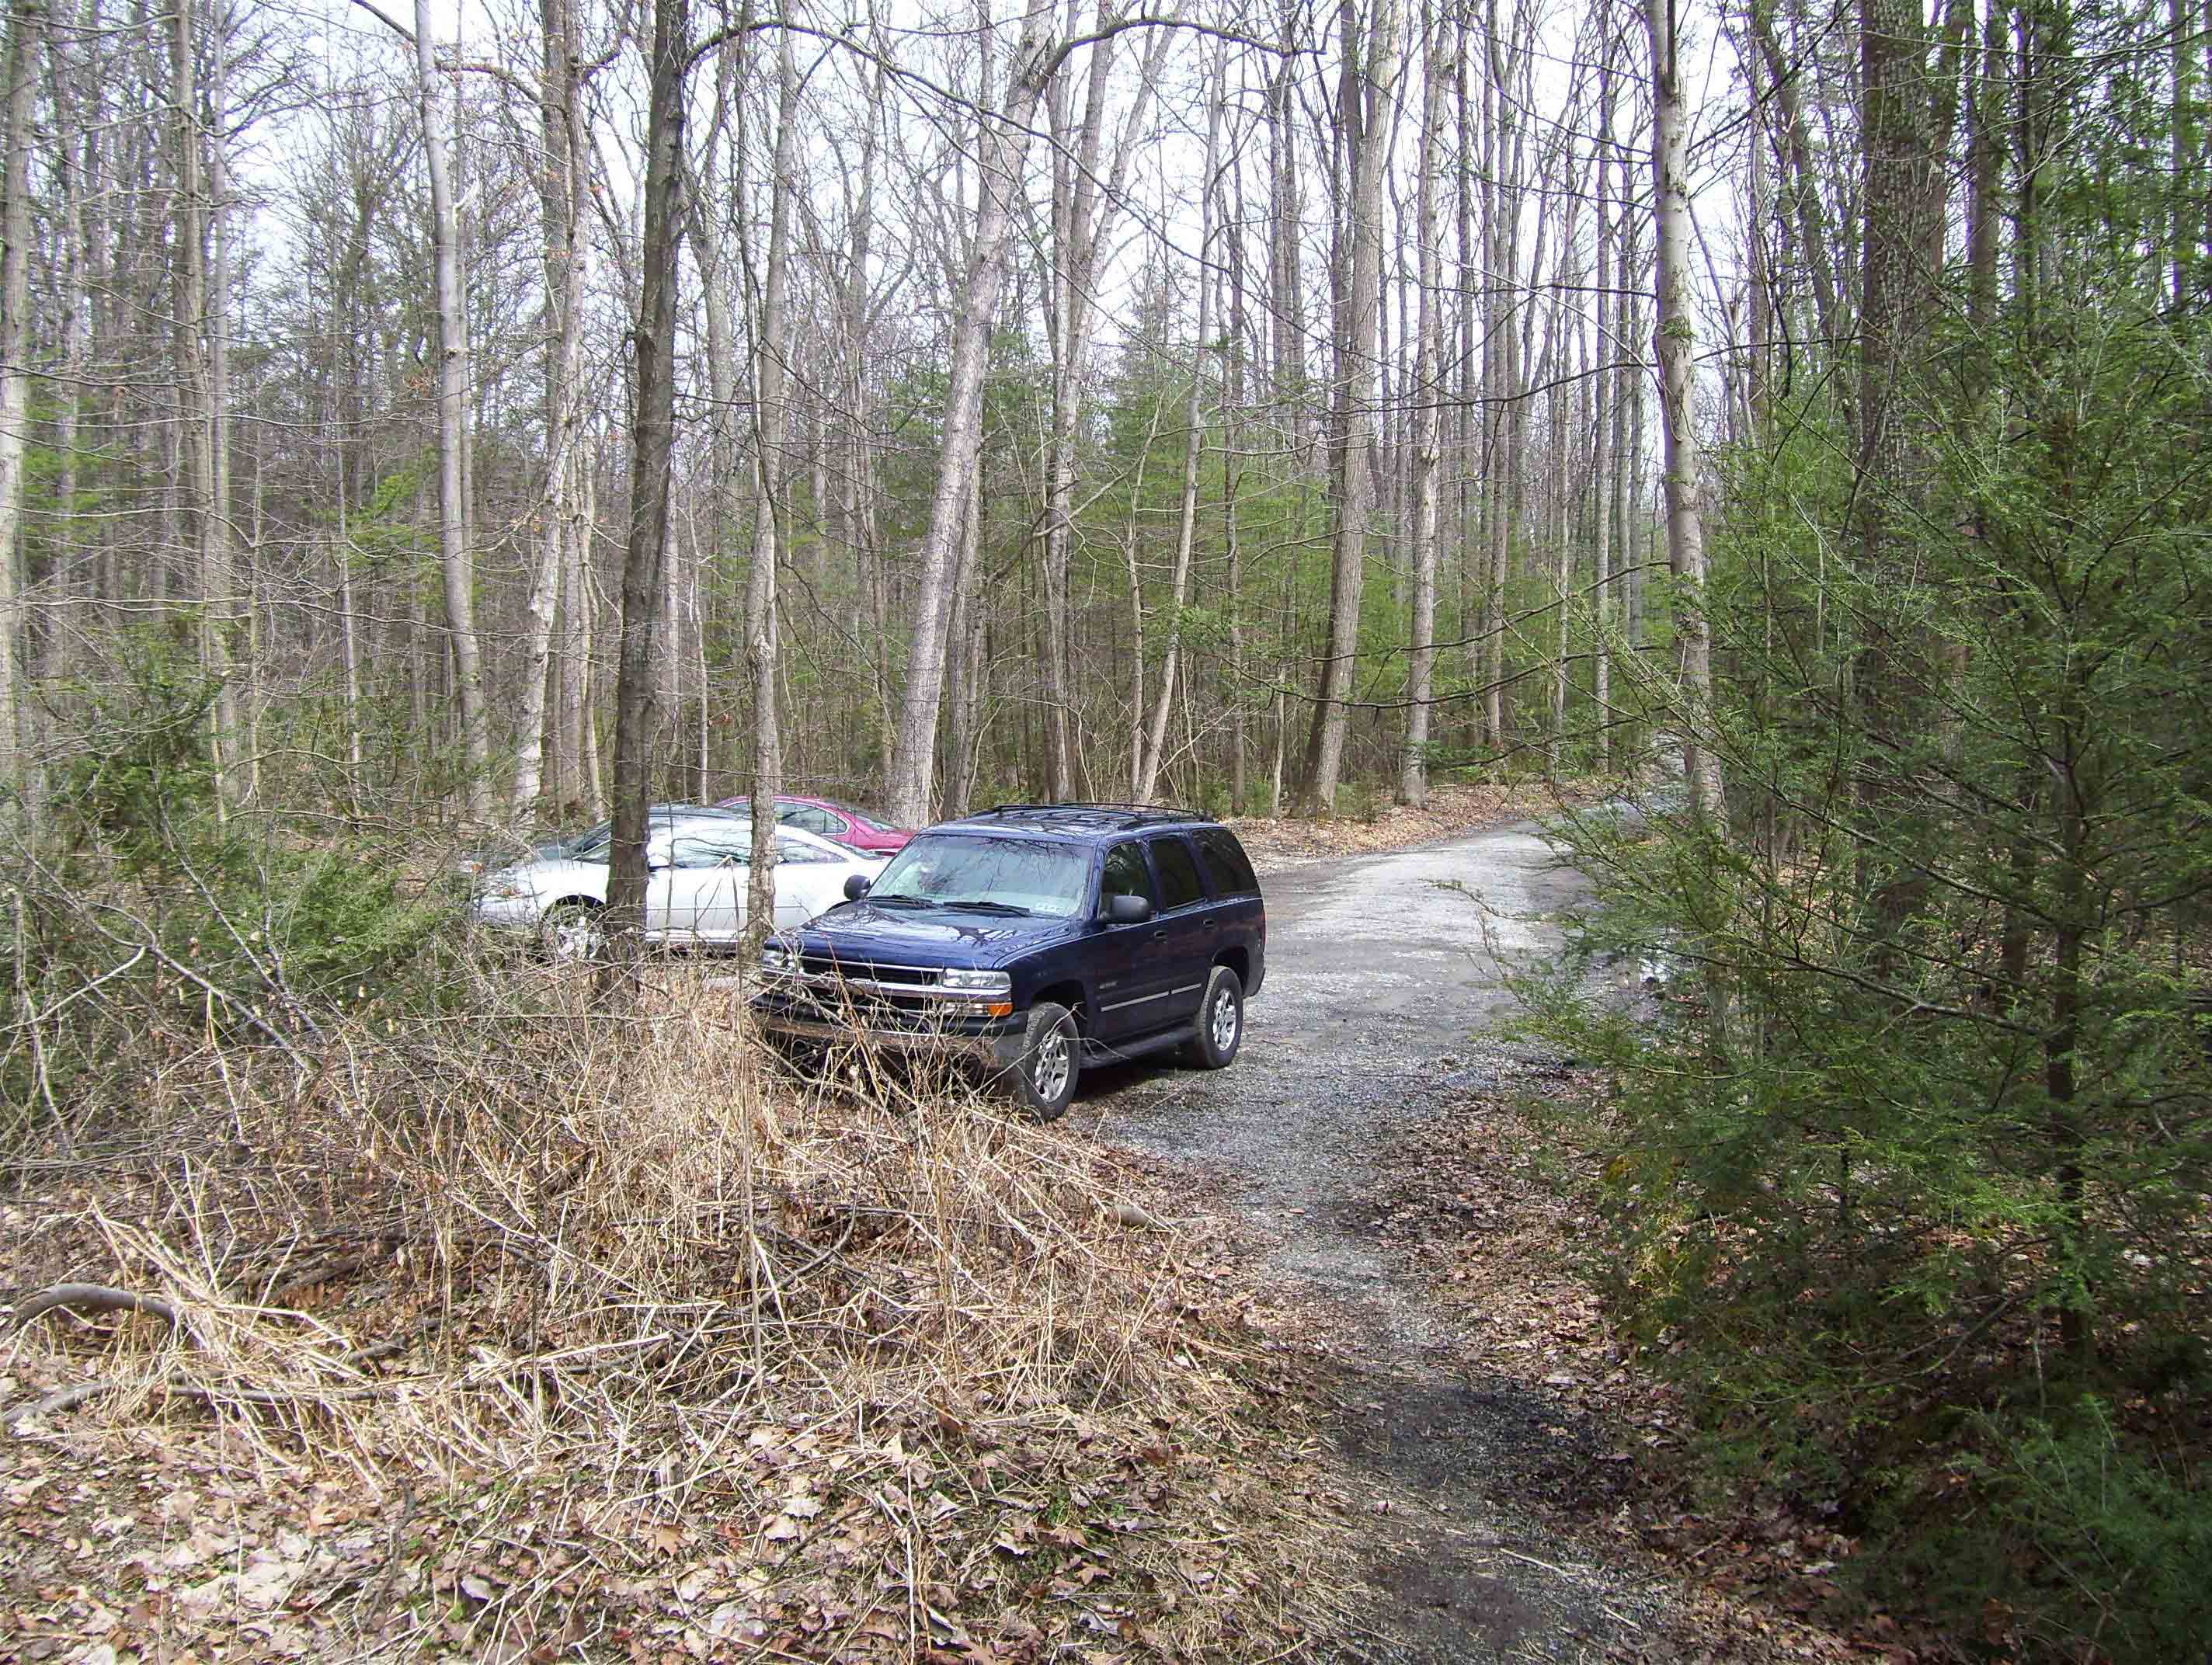 mm 1.3  Parking at end of Old Shippensburg Road.  From here it is only a few feet to the AT at the northern crossing of Toms Run and also the northern terminus of the Sunset Rocks Trail.  Courtesy dlcul@conncoll.edu